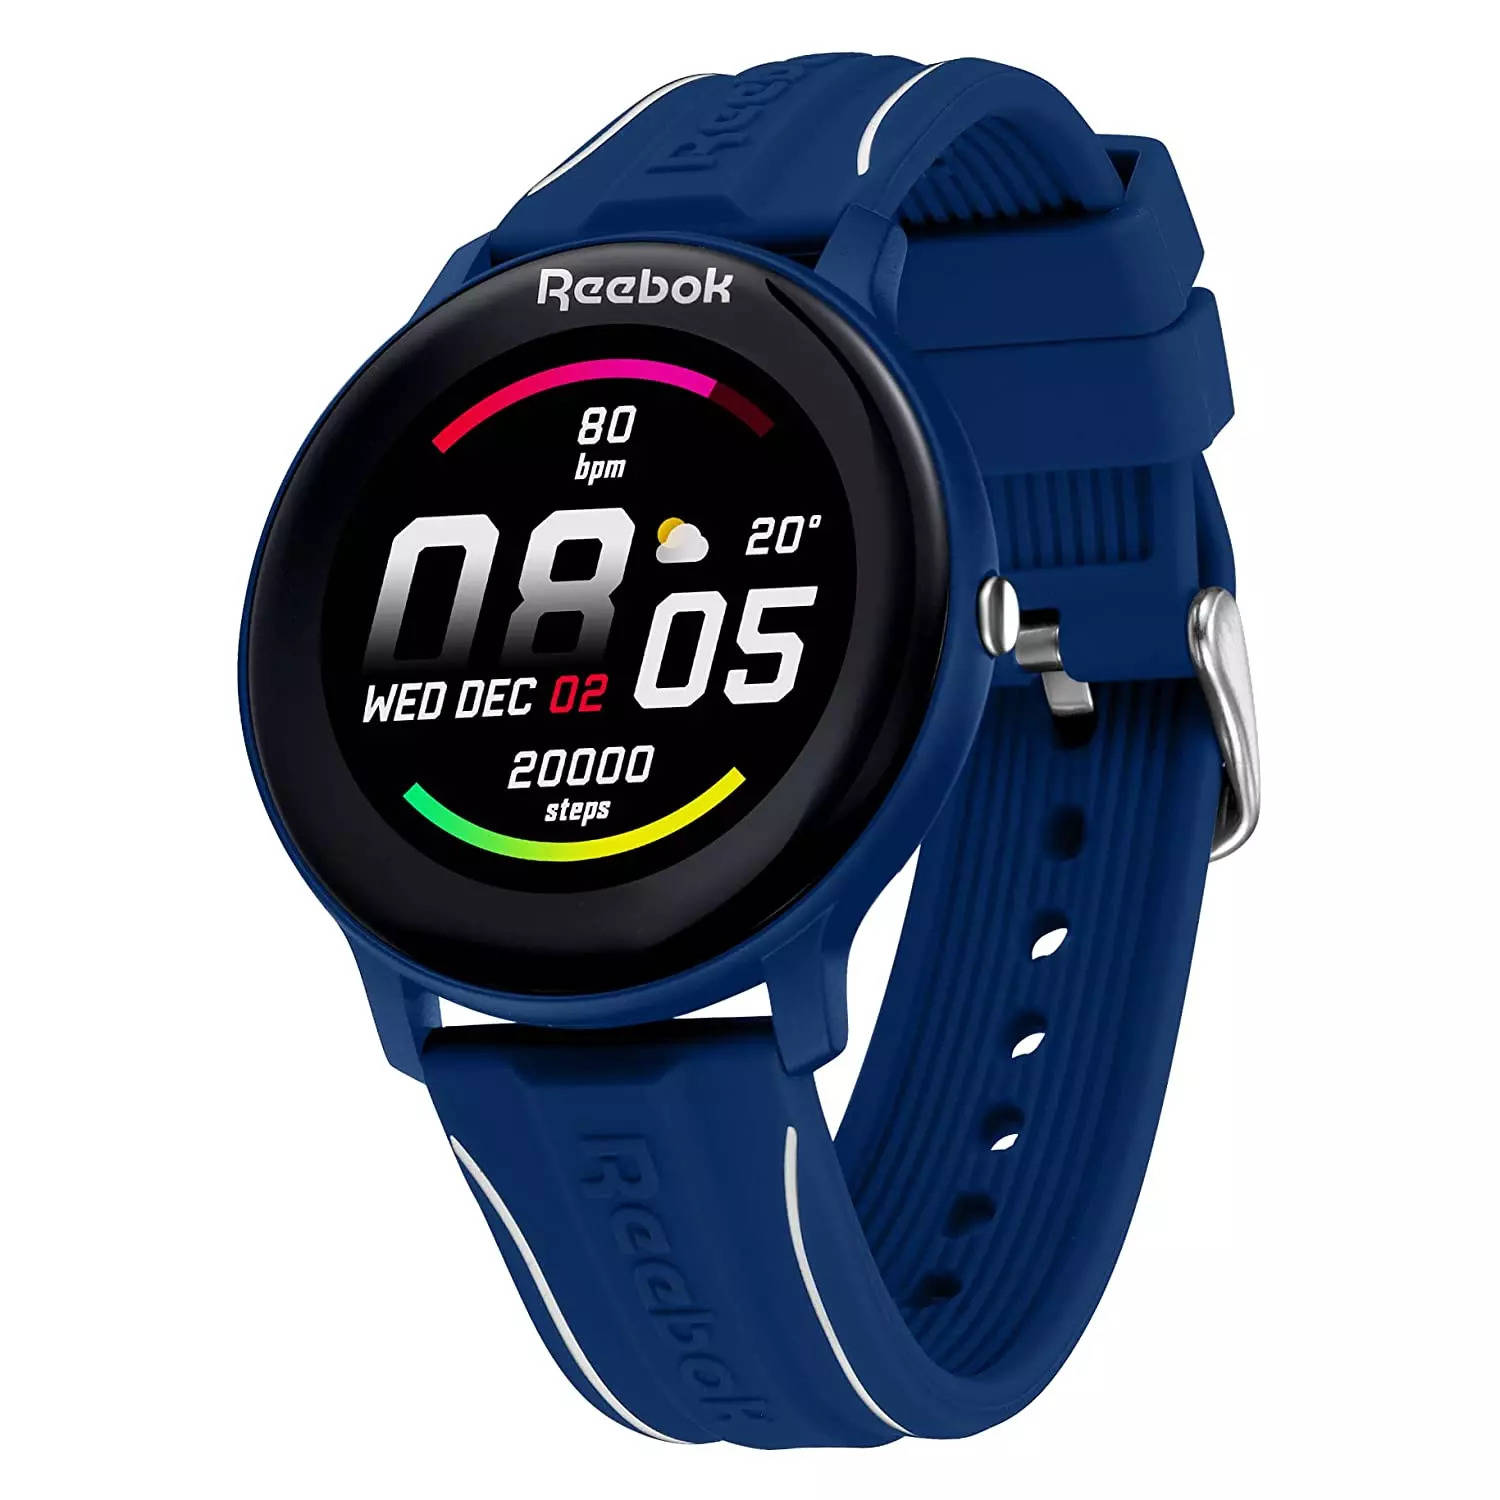 Reebok ActiveFit smartwatch with 15 days battery life Times India